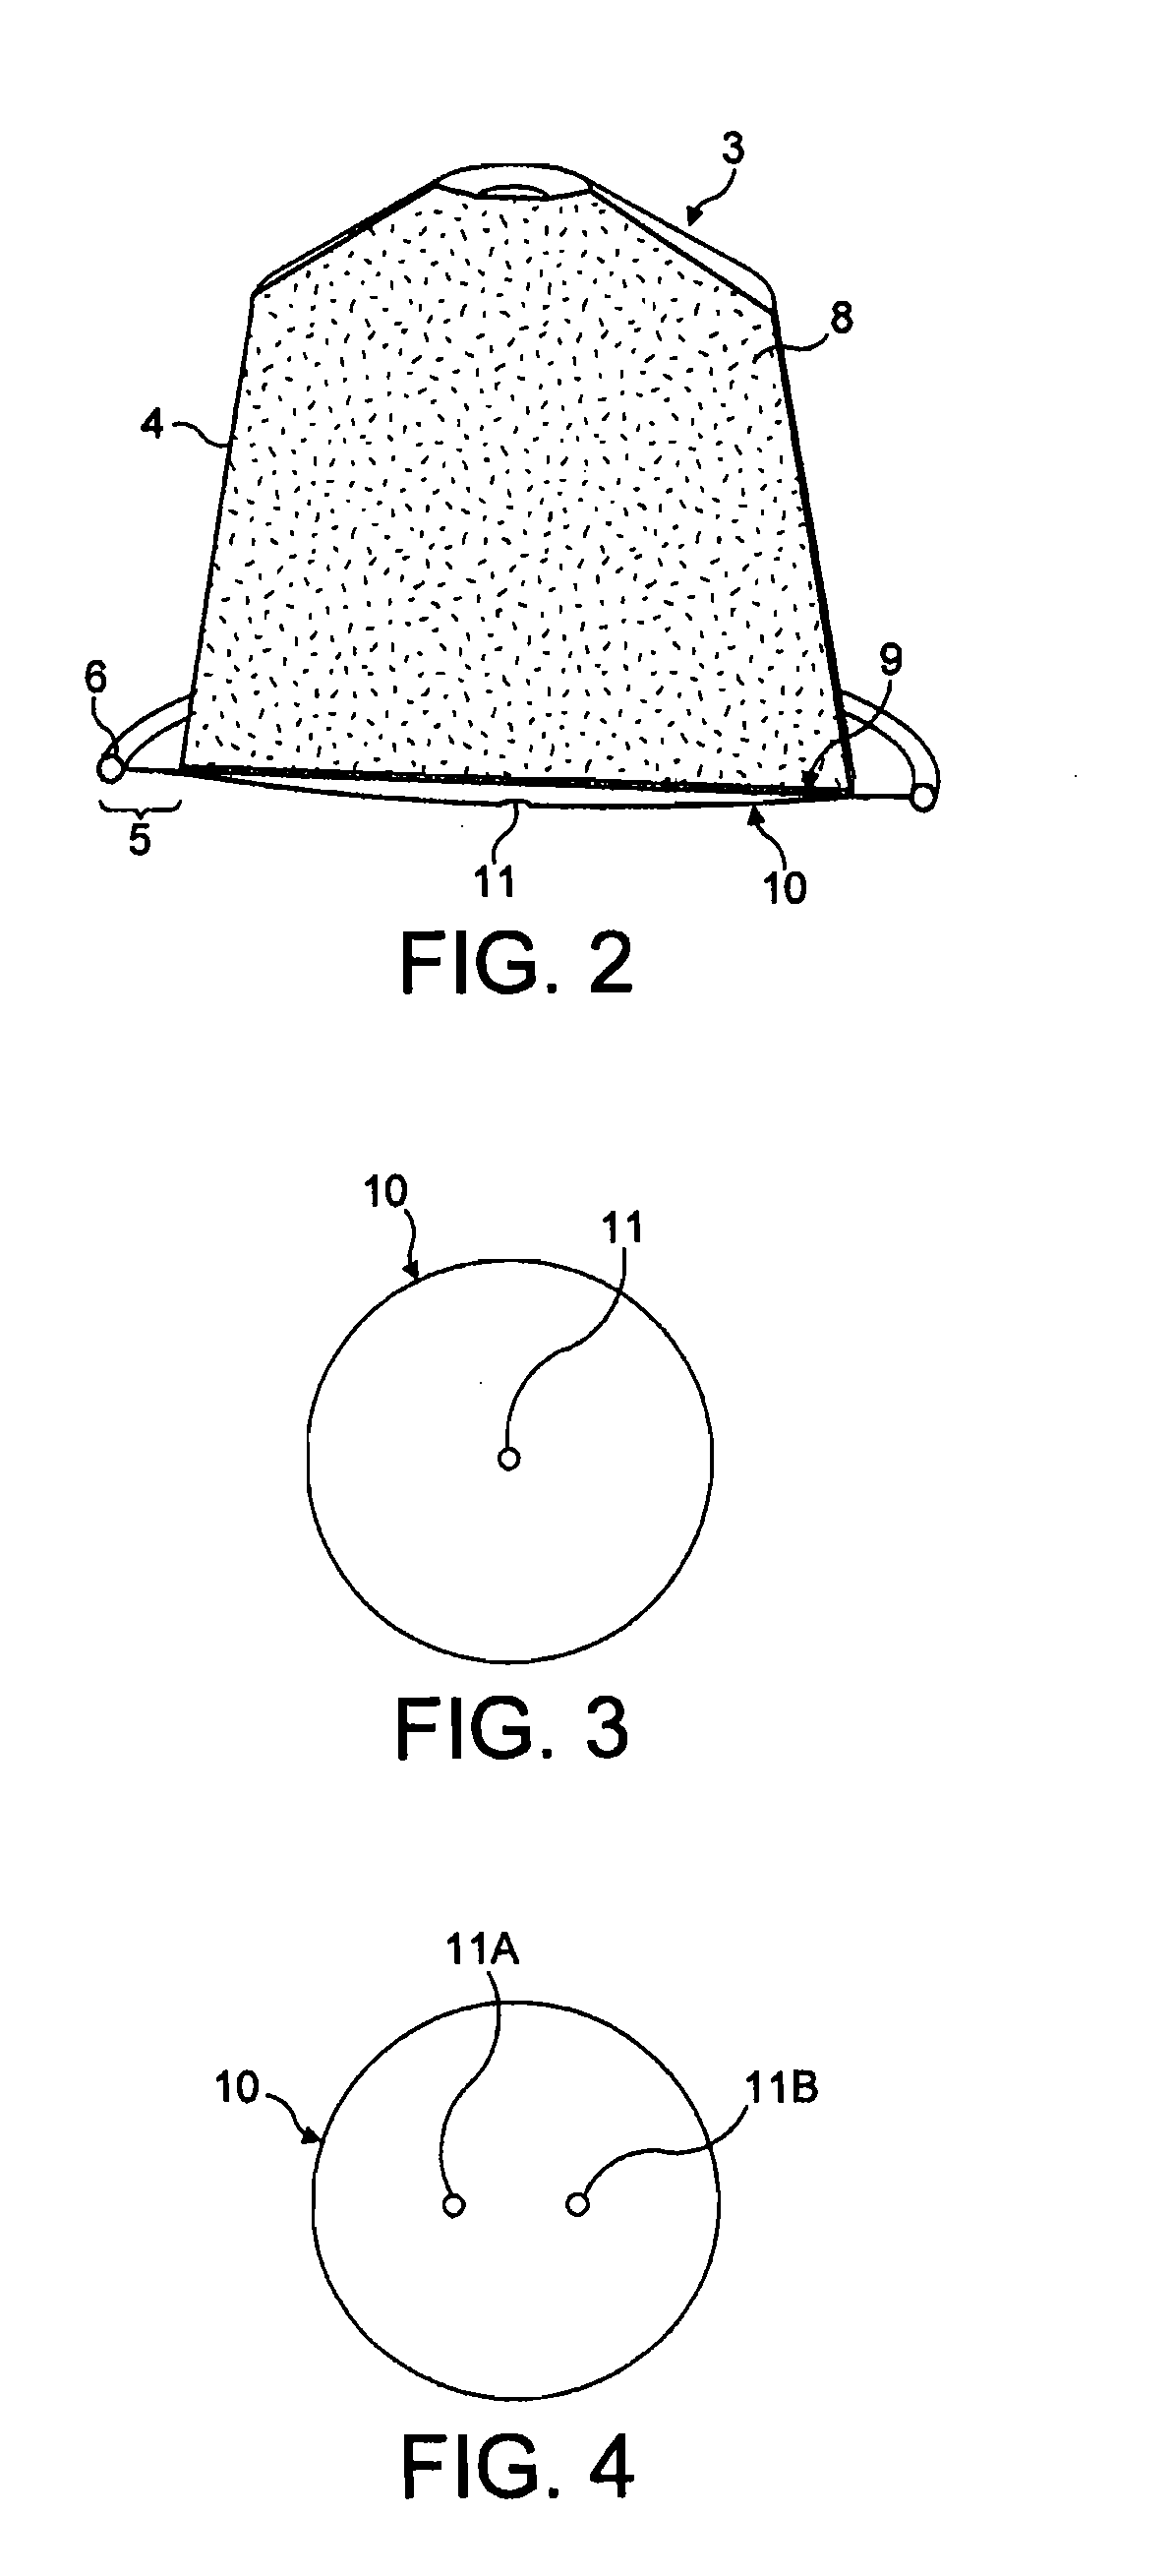 Capsule for preparing coffee in a device comprising a cartridge holder with relief and recessed elements